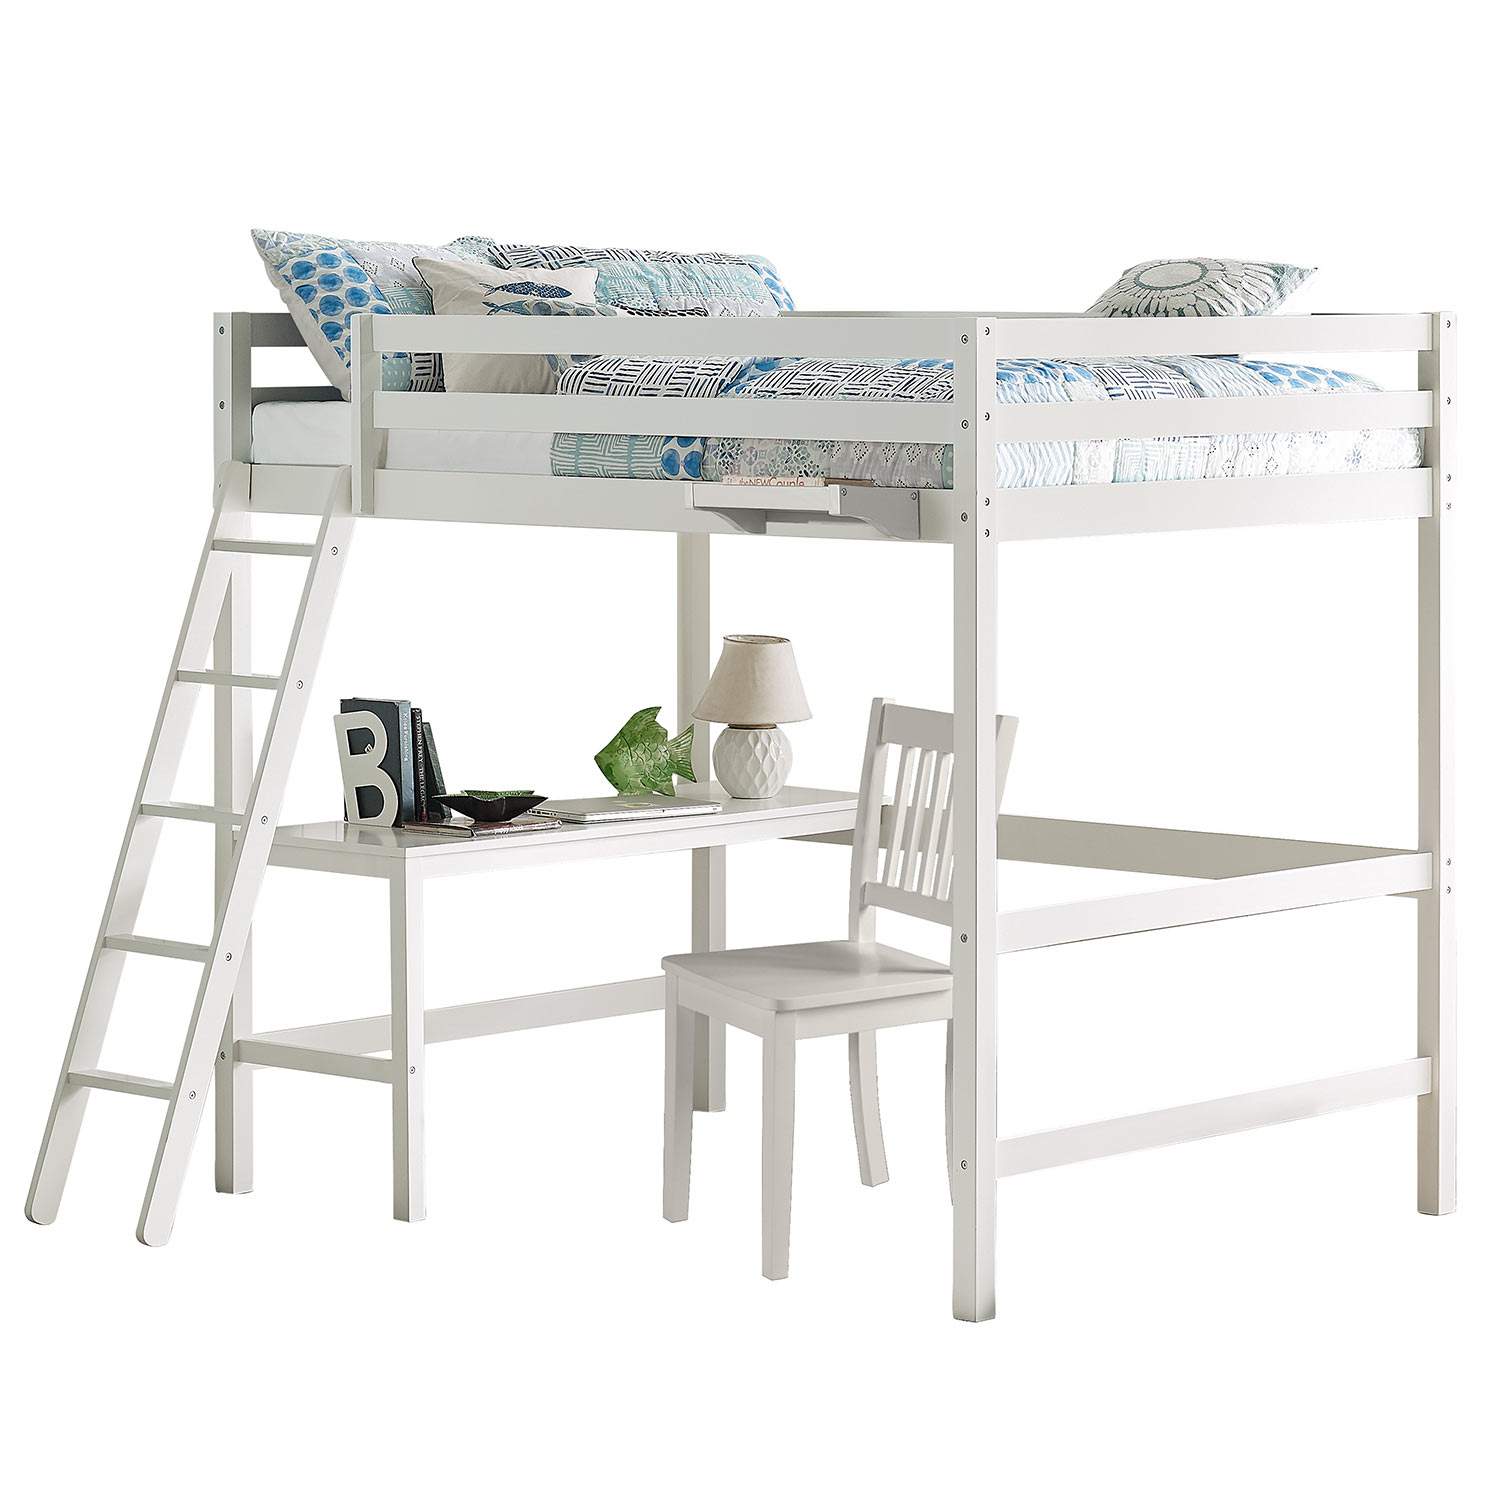 Hillsdale Caspian Full Loft Bed with Chair and Hanging Nightstand - White